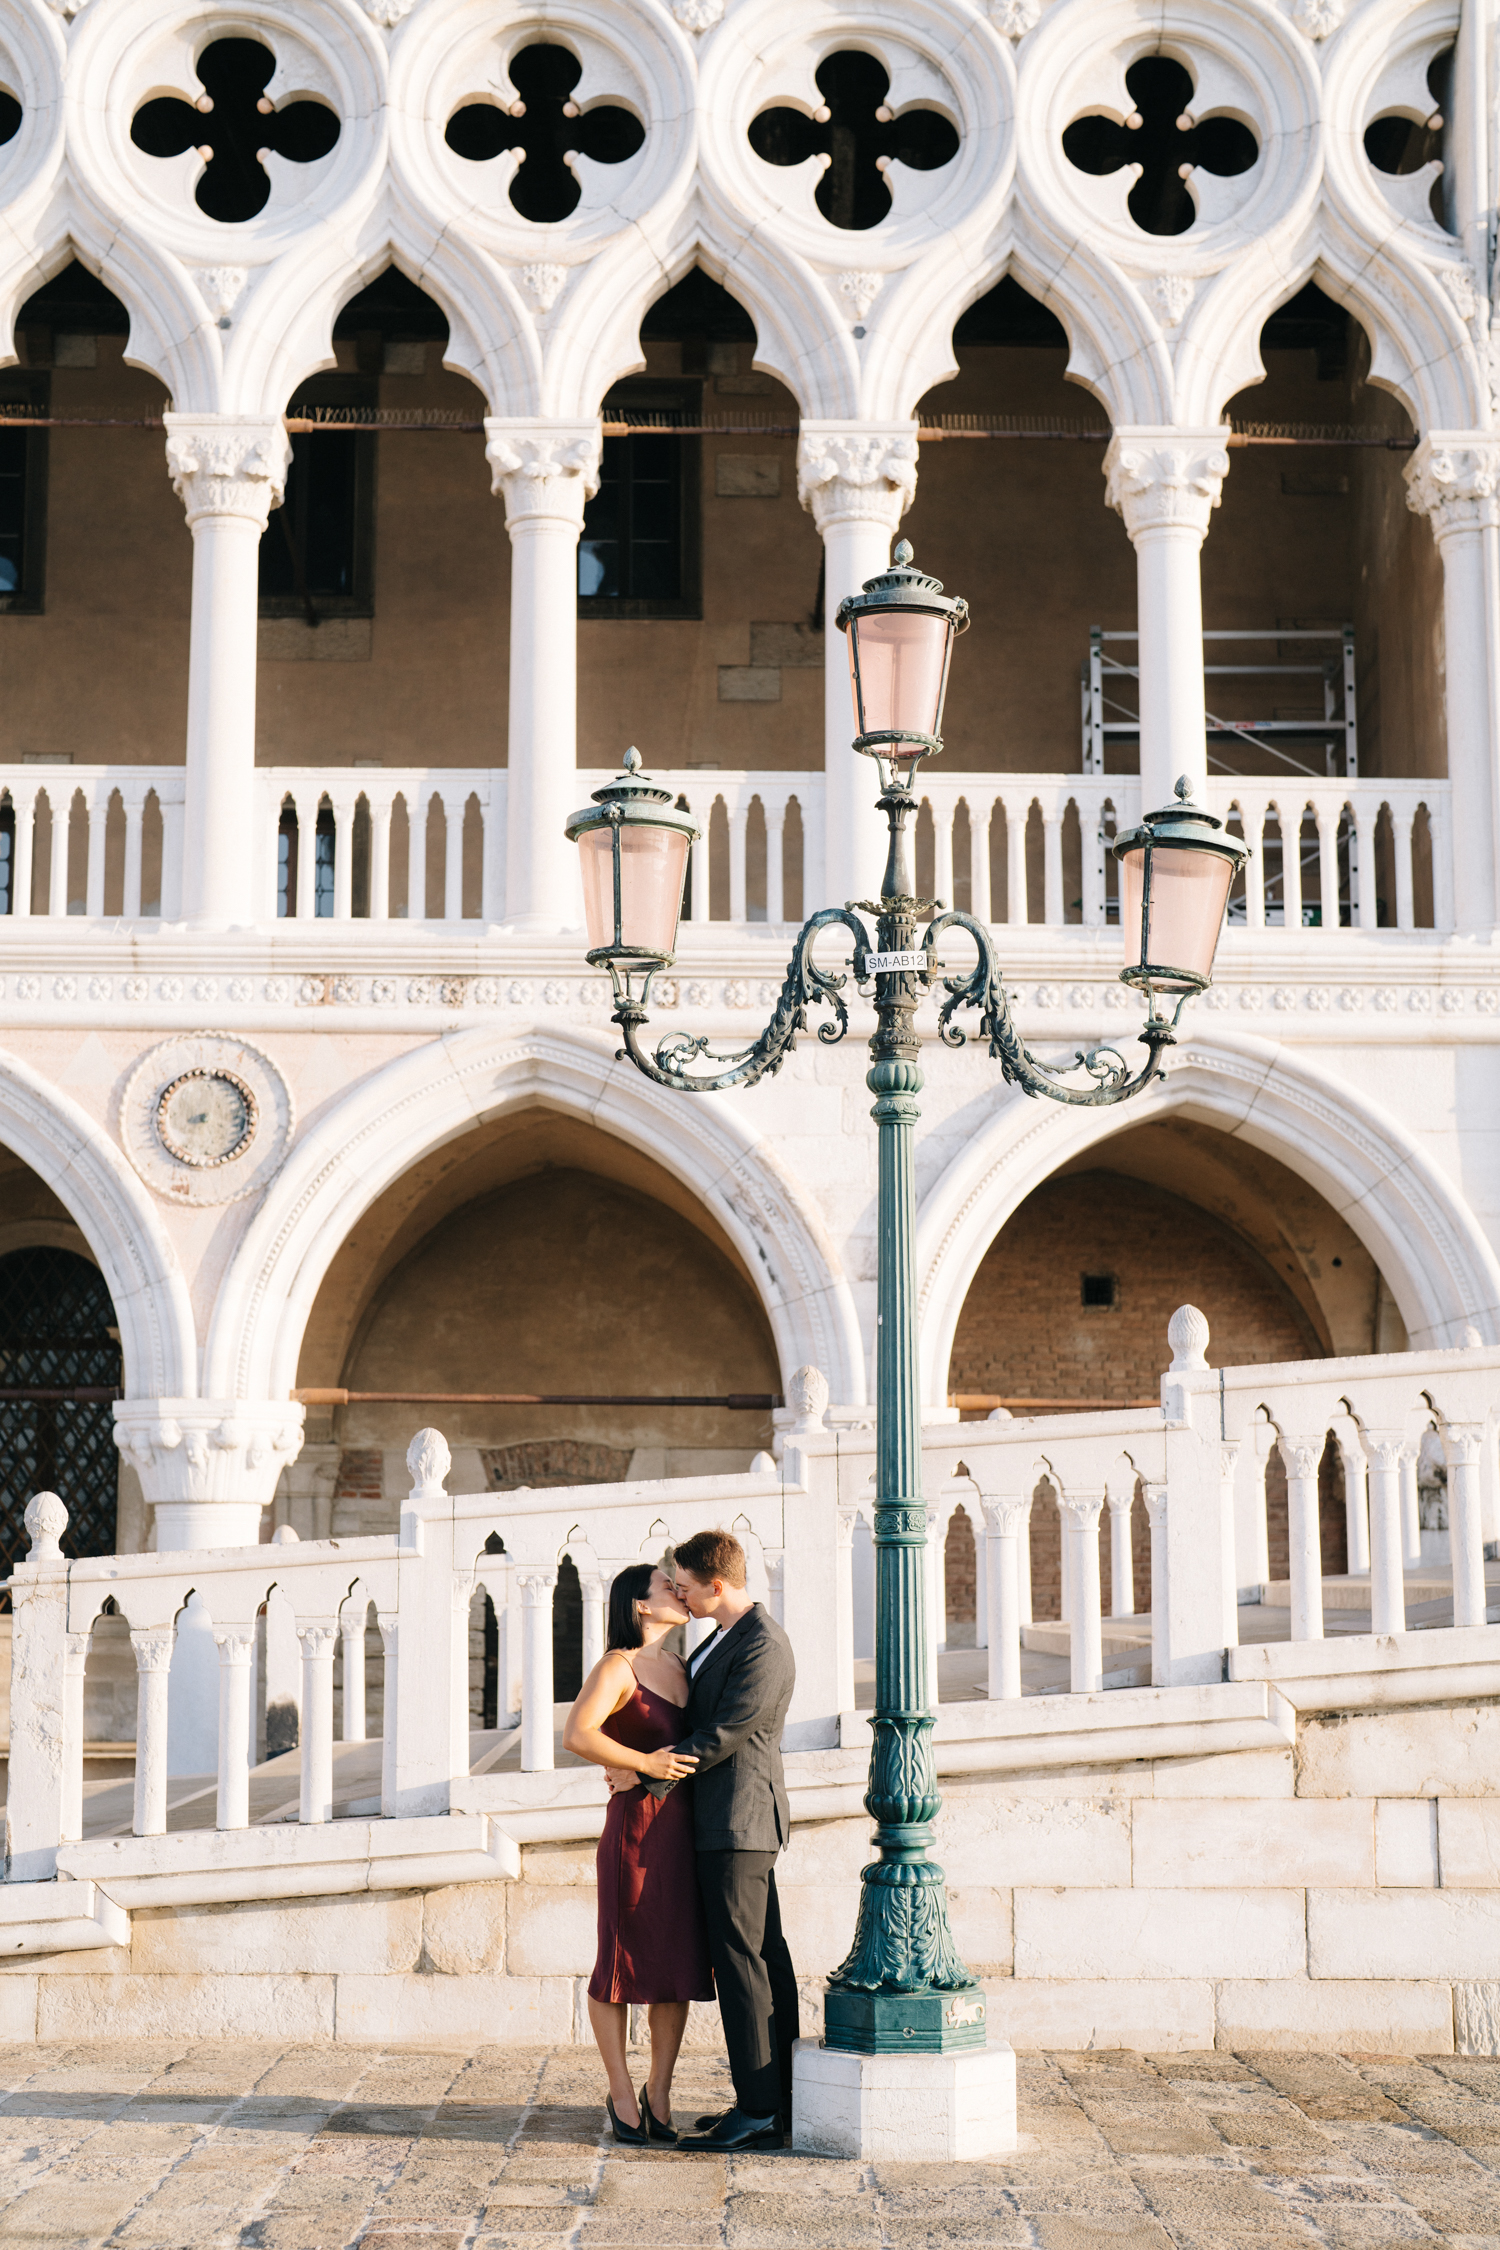 Book the best Venice photographer in Italy for anniversary, engagement, honeymoon, vacation photoshoot